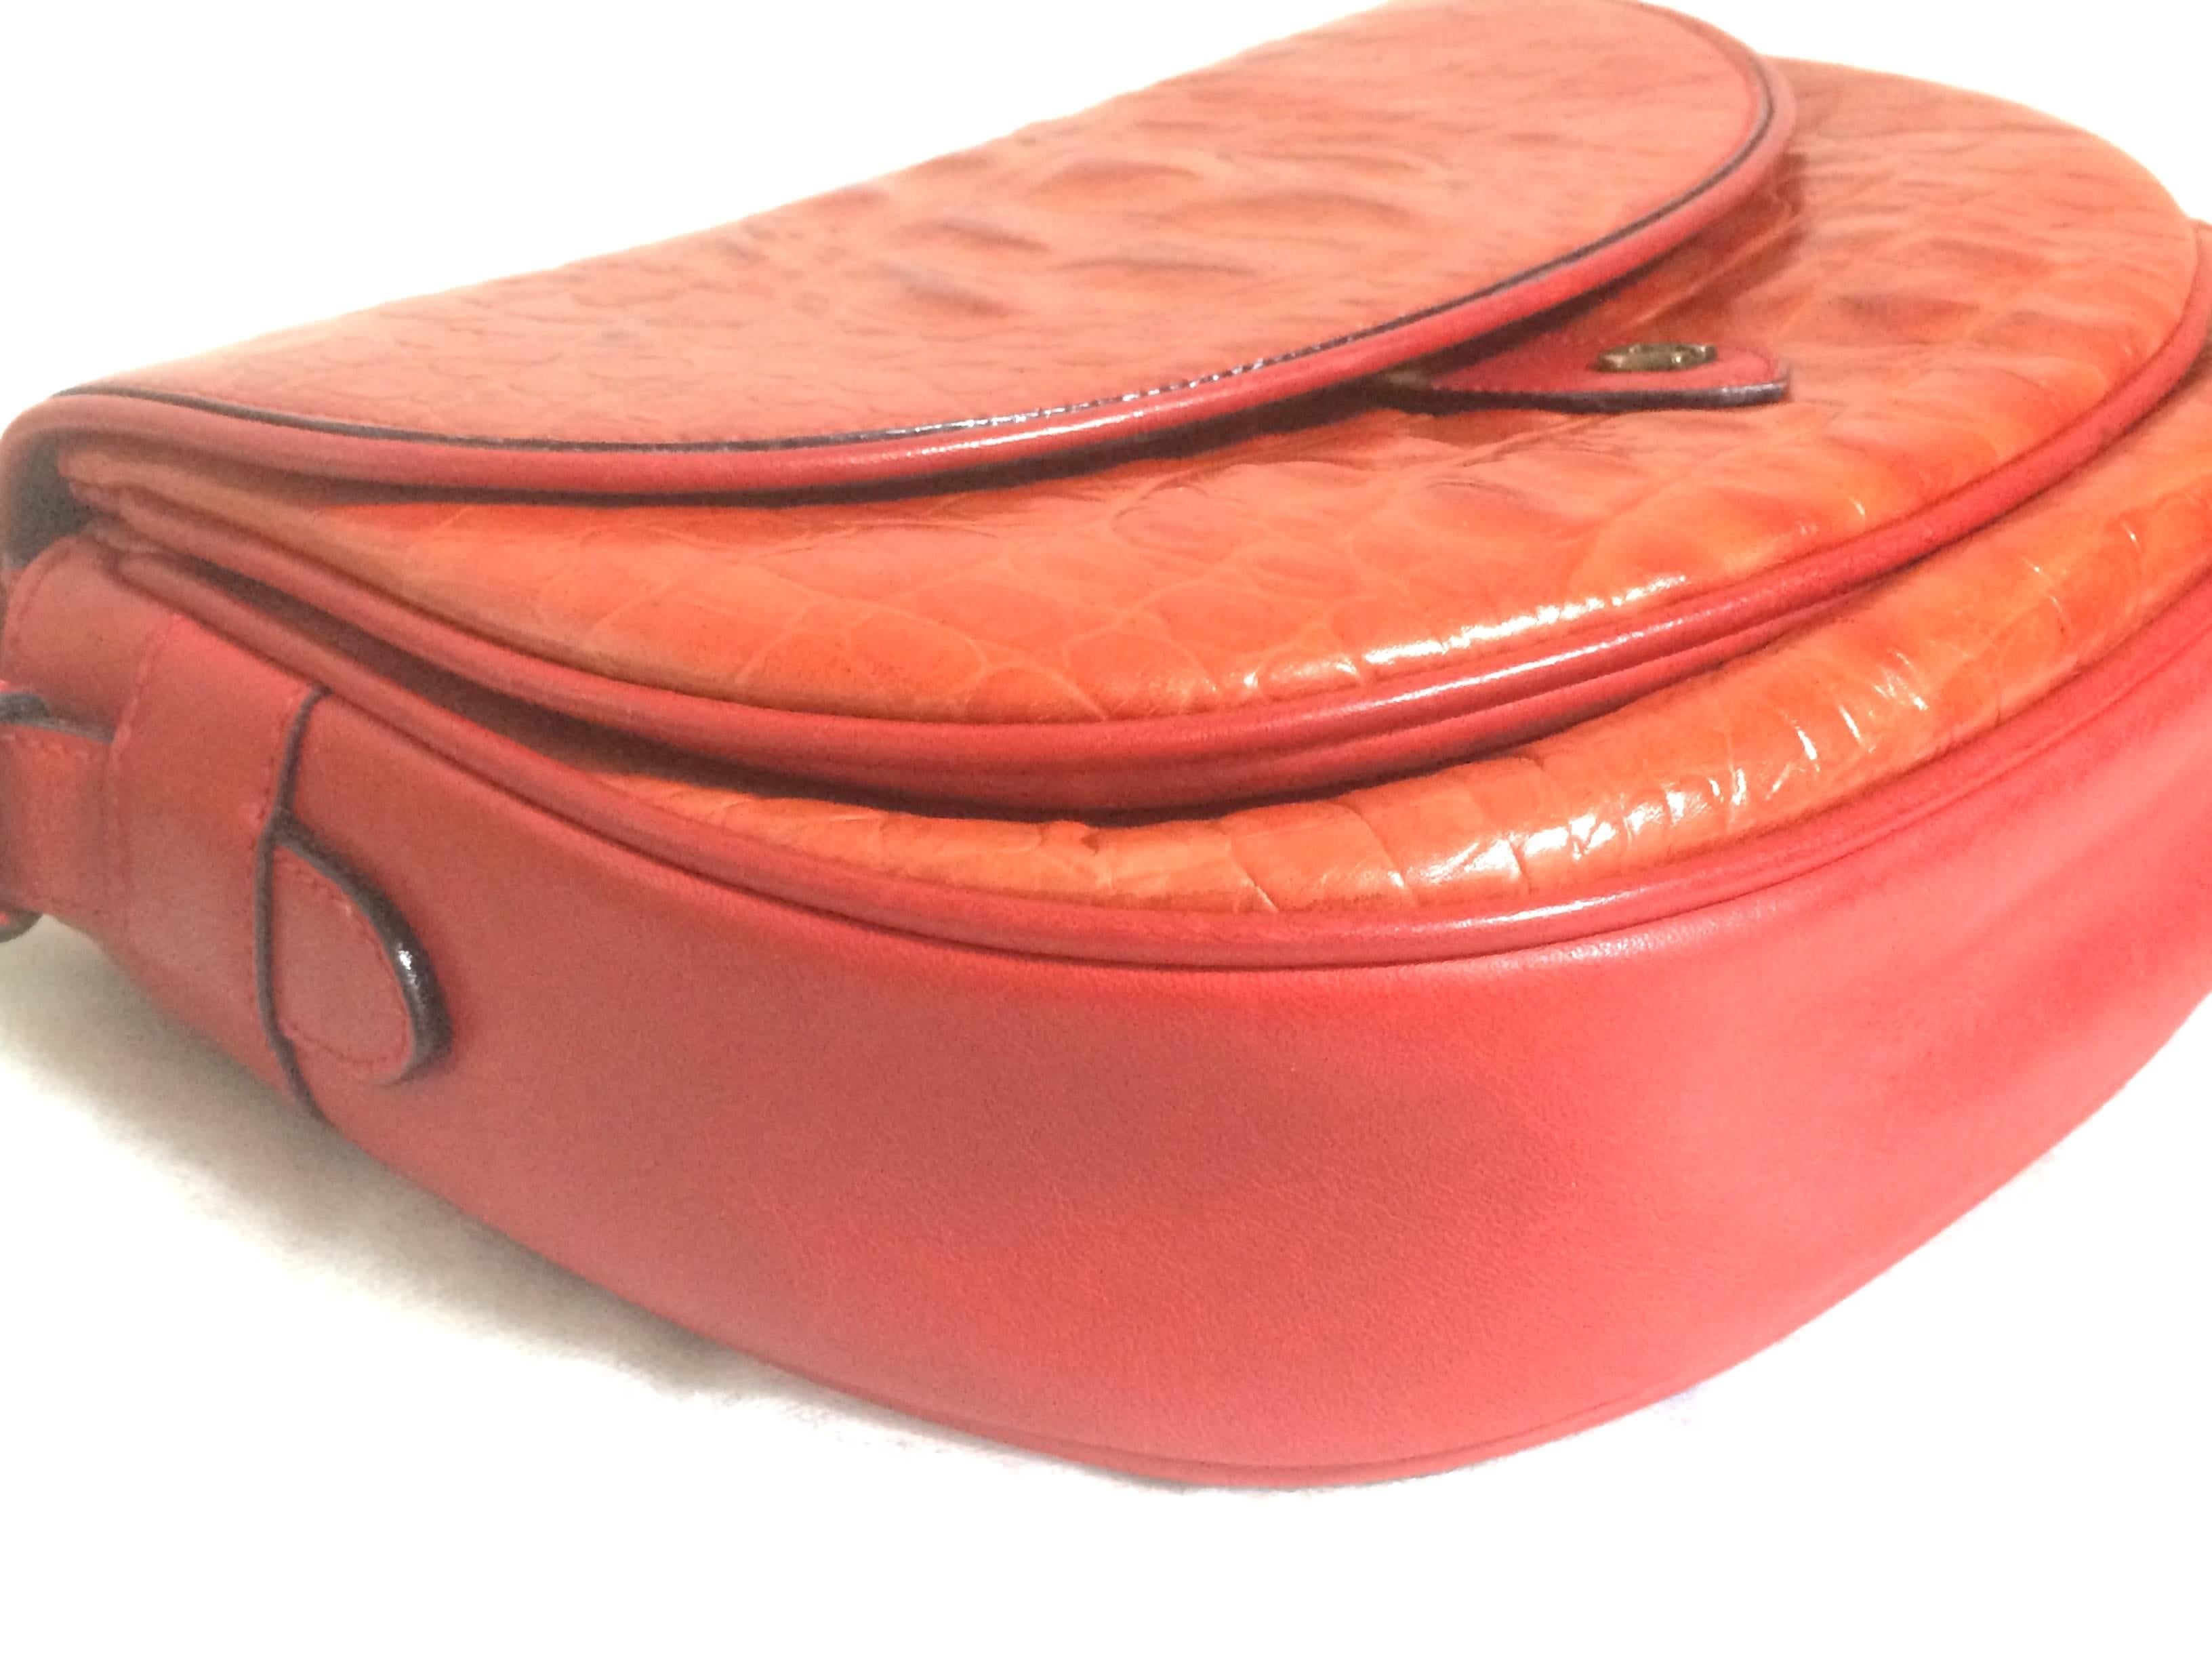 1990s Vintage Etienne Aigner alligator embossed leather shoulder purse. Stunning color of deep orange.

This is a vintage purse of Aigner in the early 90s. 
The leather is alligator embossed finish leather and looking so real and stunning! 
The